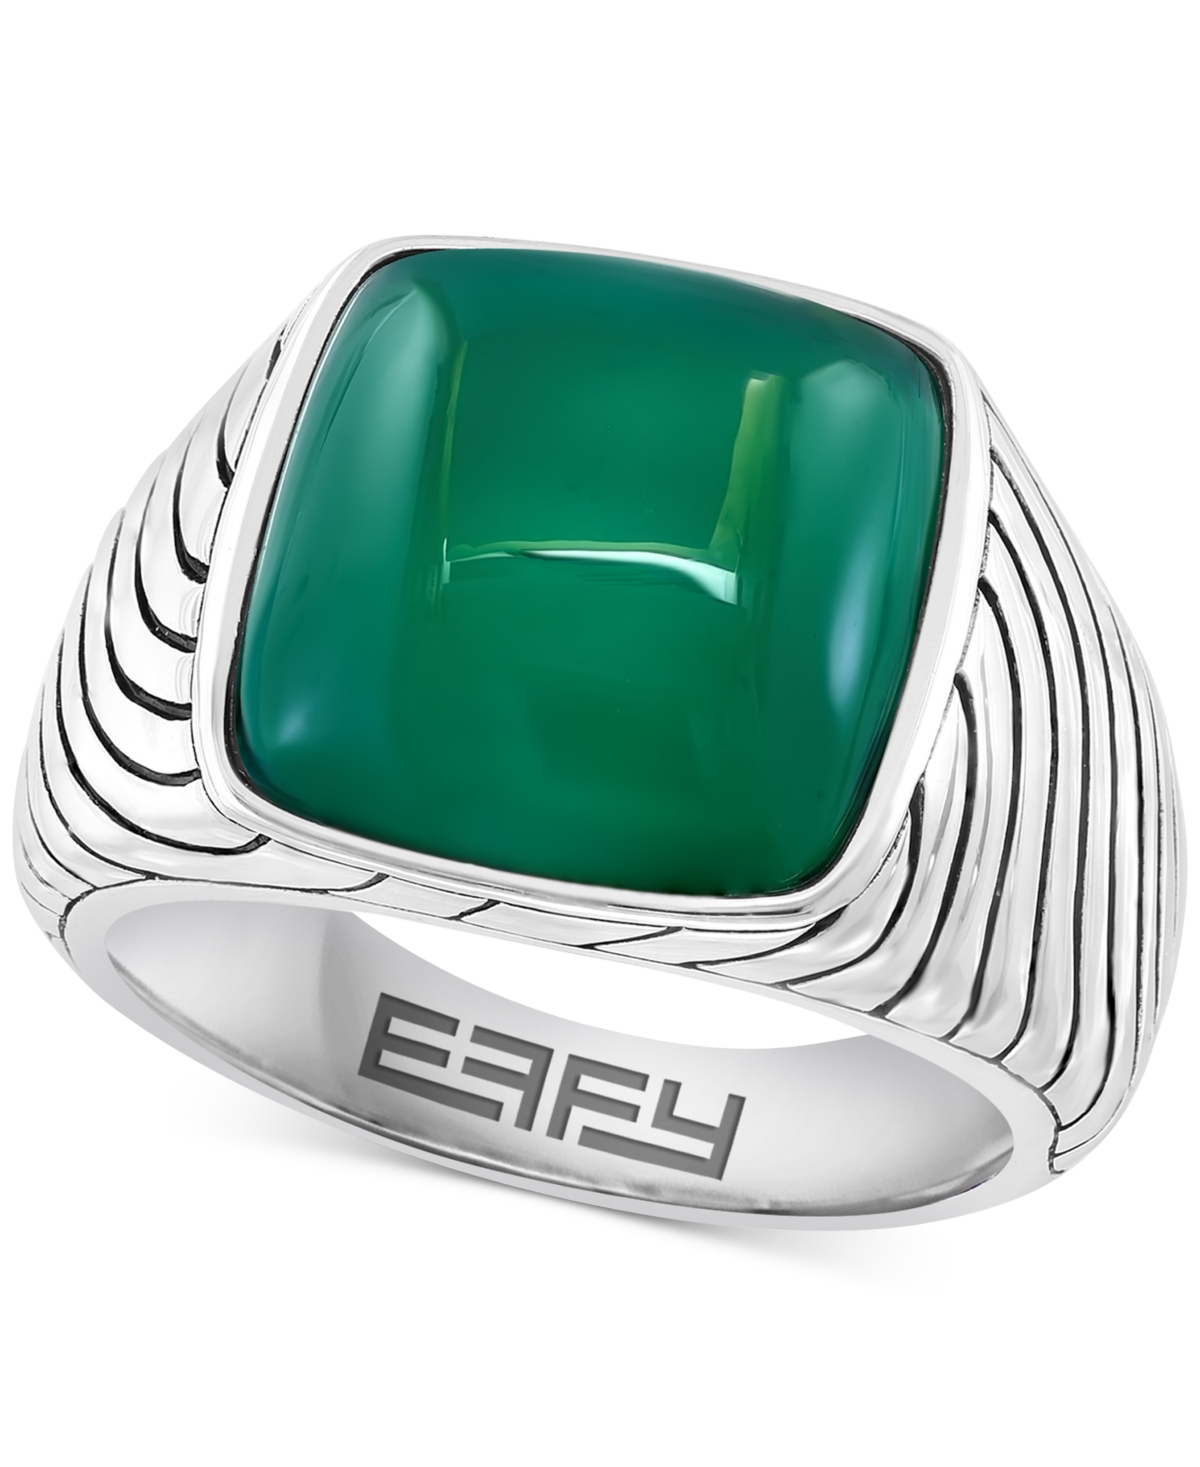 Effy Collection Effy Men's Green Chalcedony Textured Ring In Sterling Silver